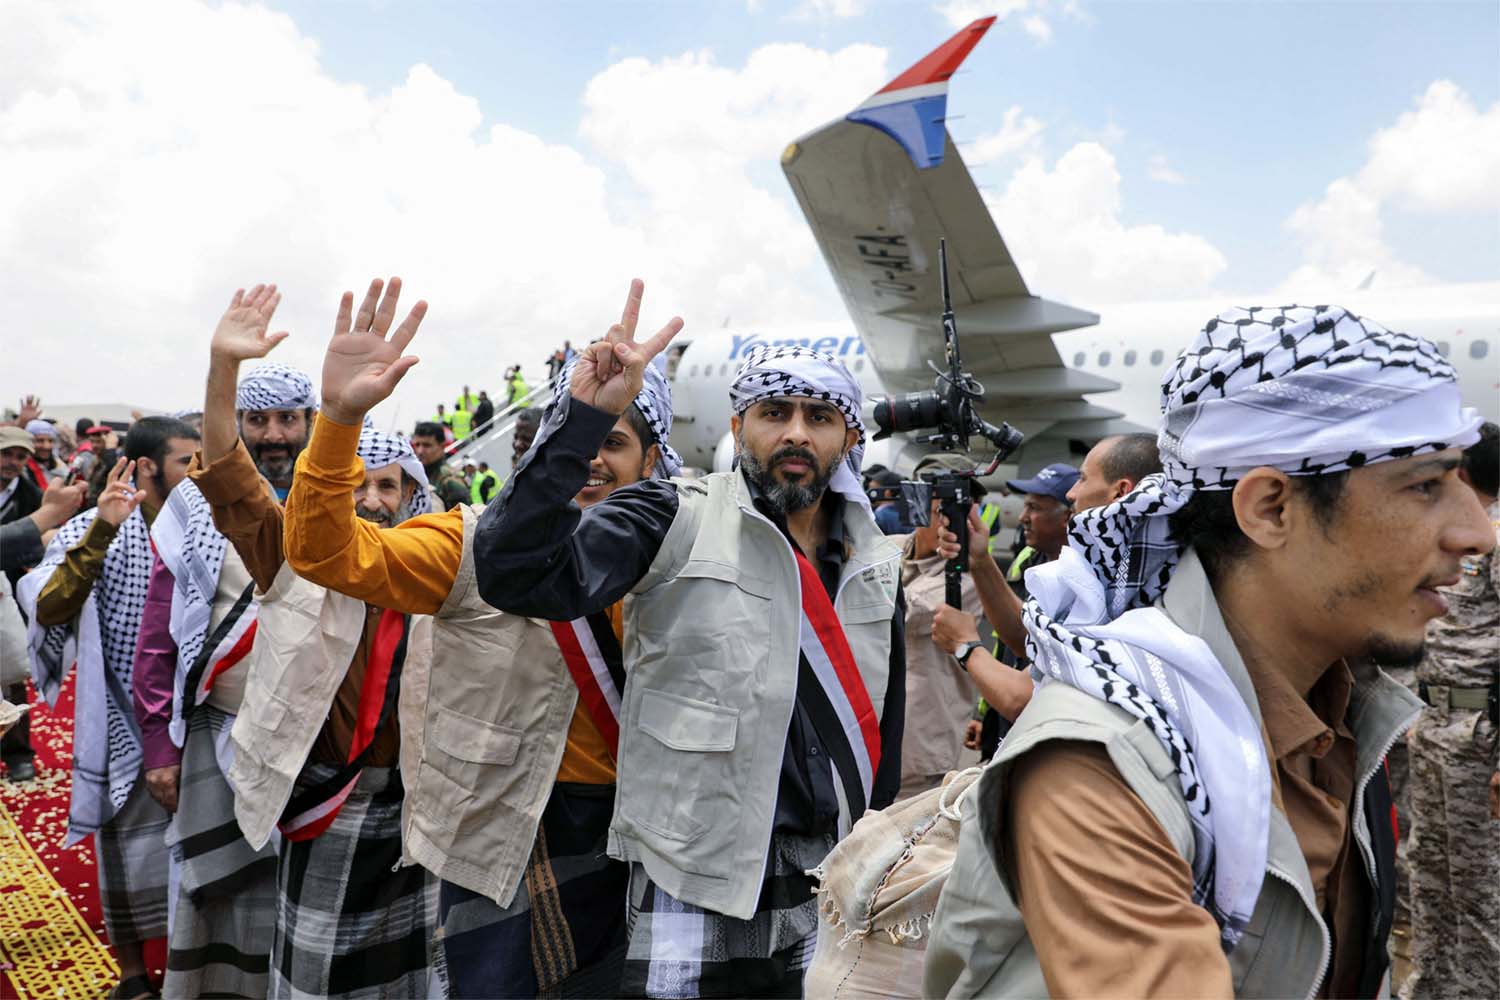 It is most significant prisoner exchange in Yemen since the Saudi-led coalition and Houthis freed more than 1,000 detainees in October 2020